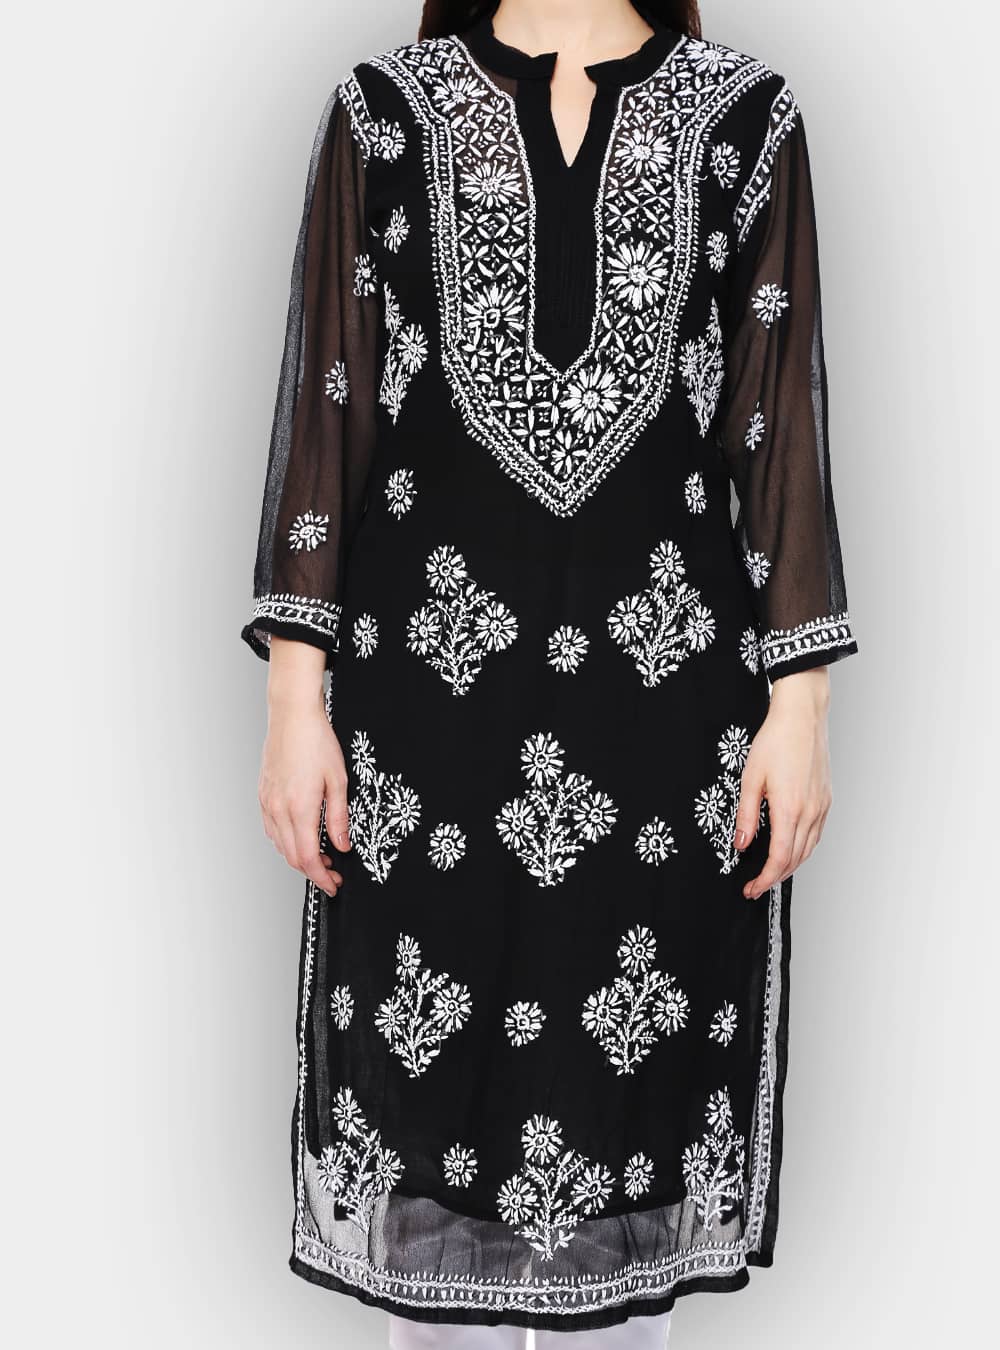 Details more than 172 white lucknow chikan kurti latest